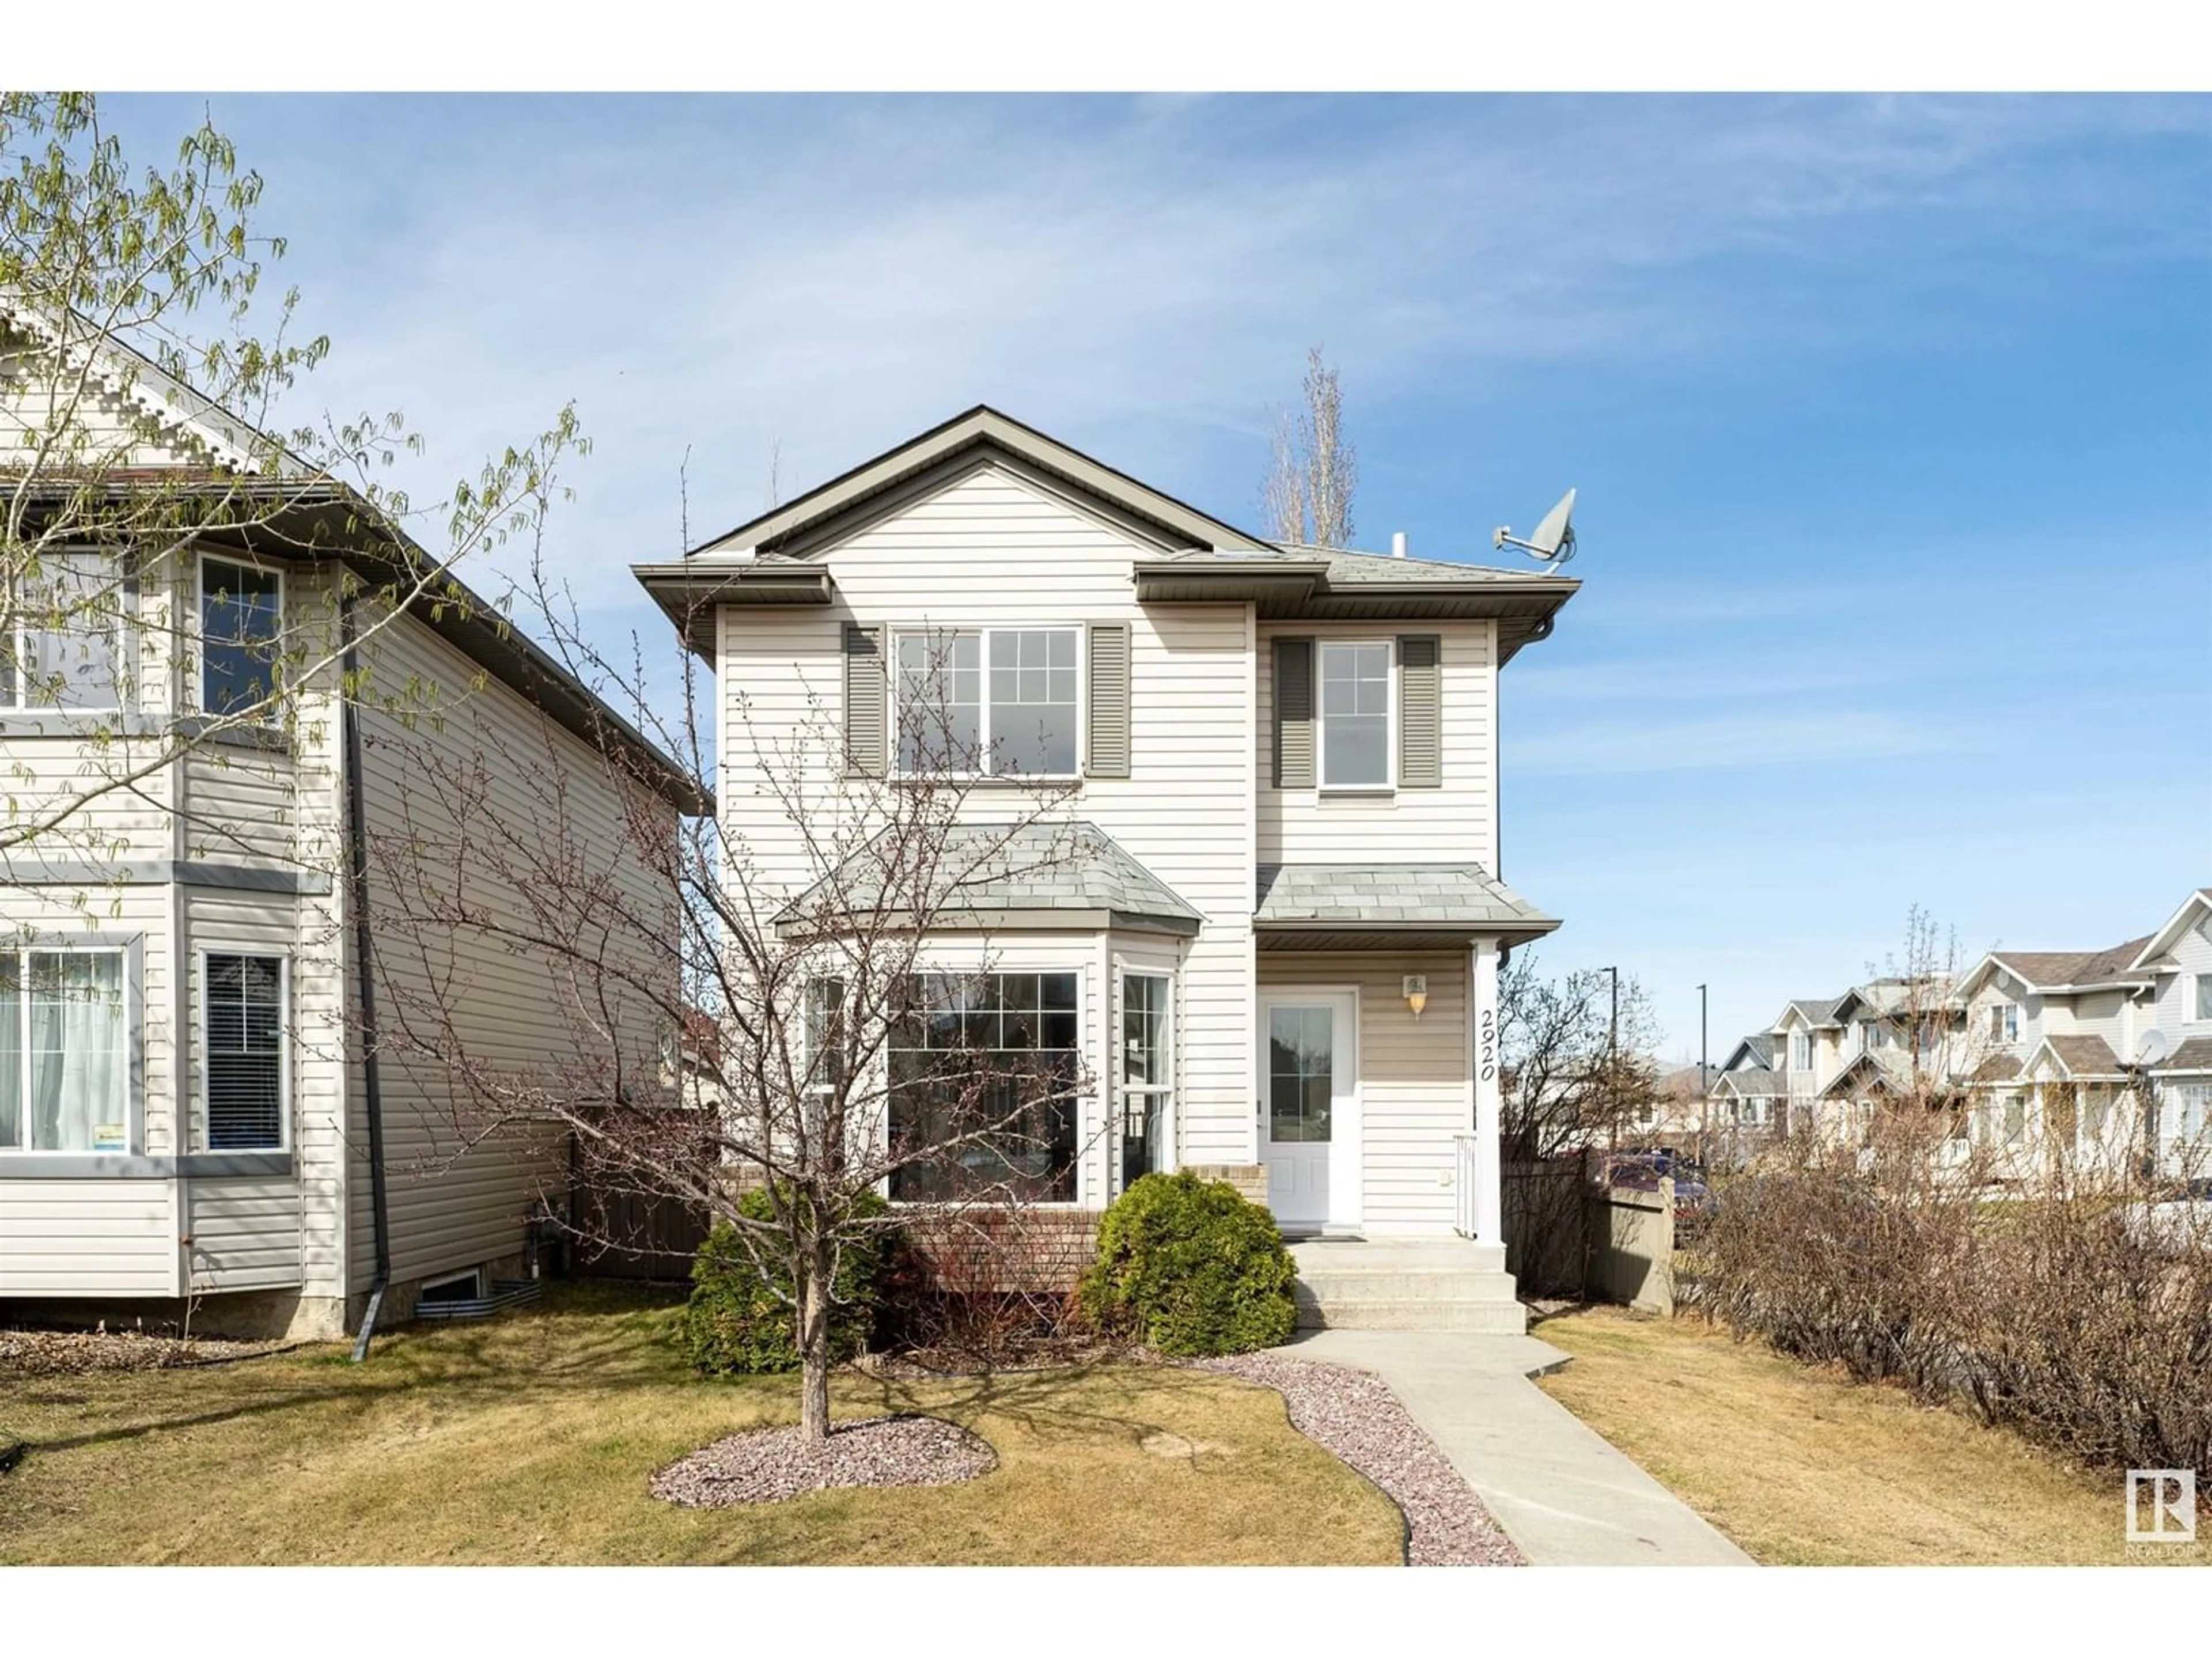 Frontside or backside of a home for 2920 31 ST NW, Edmonton Alberta T6T1T9